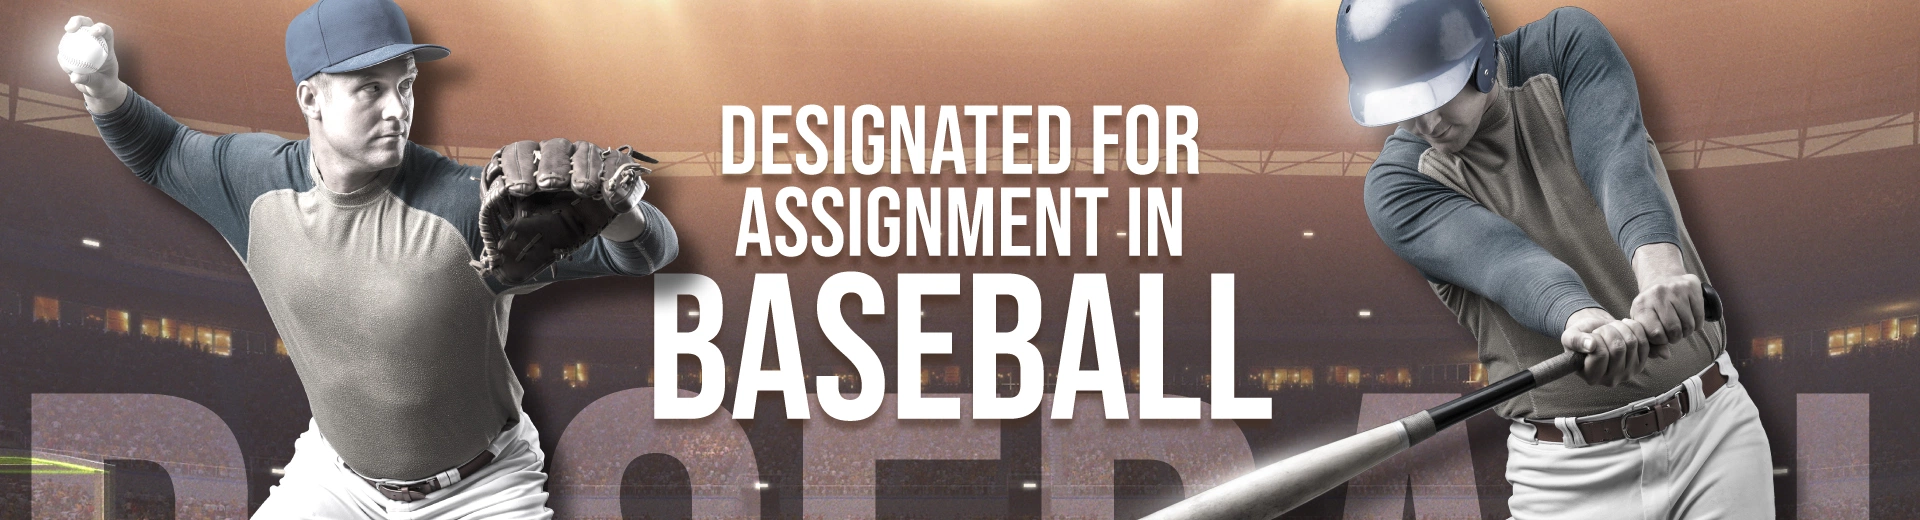 What Does "DFA" Mean in Baseball?